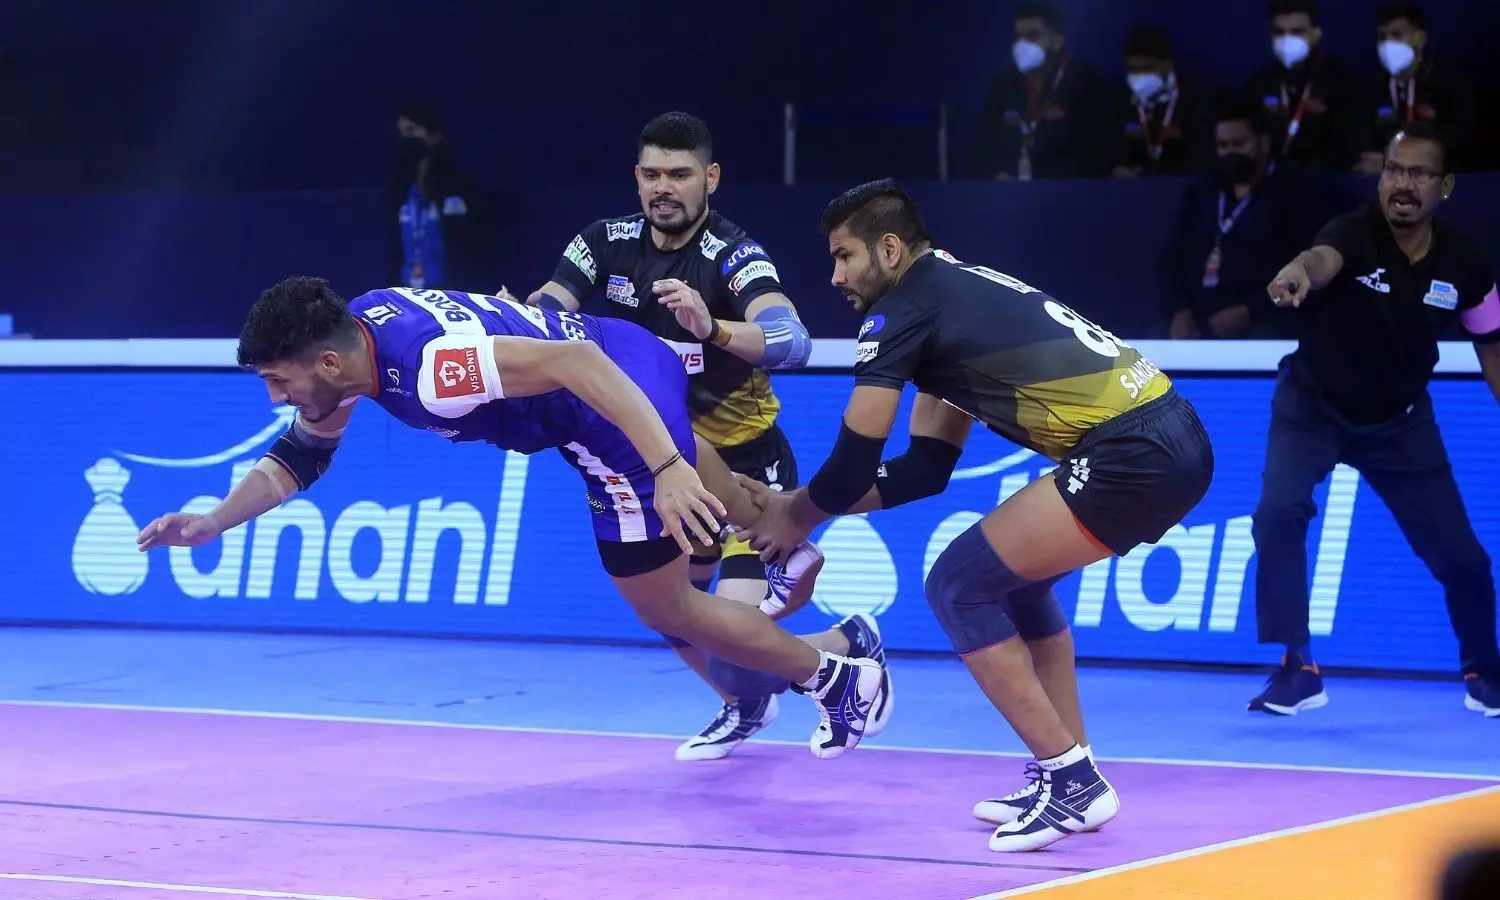 PKL 2018 (Pro Kabaddi League) today match, Bengal Warriors vs Bengaluru  Bulls, Live Streaming- When and where to watch, telecast, IST Time |  Cricket News